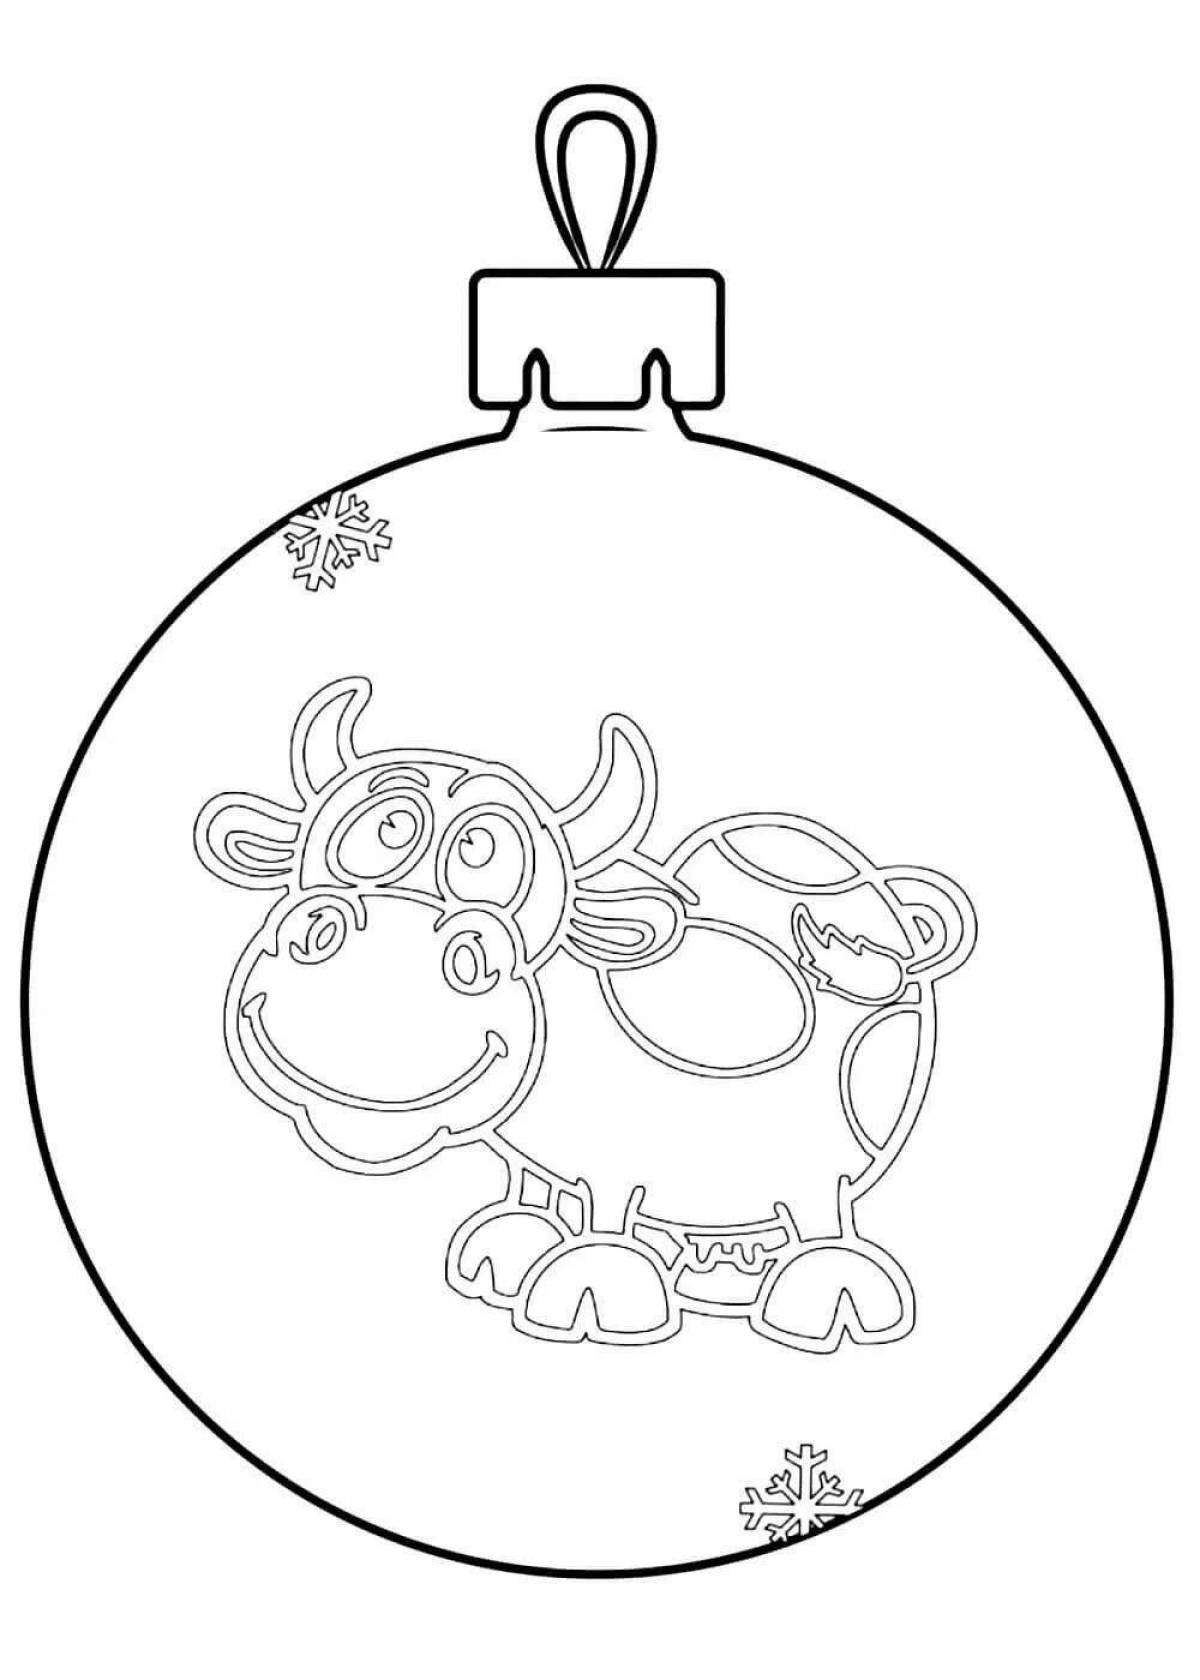 Gorgeous Christmas ball coloring page for kids